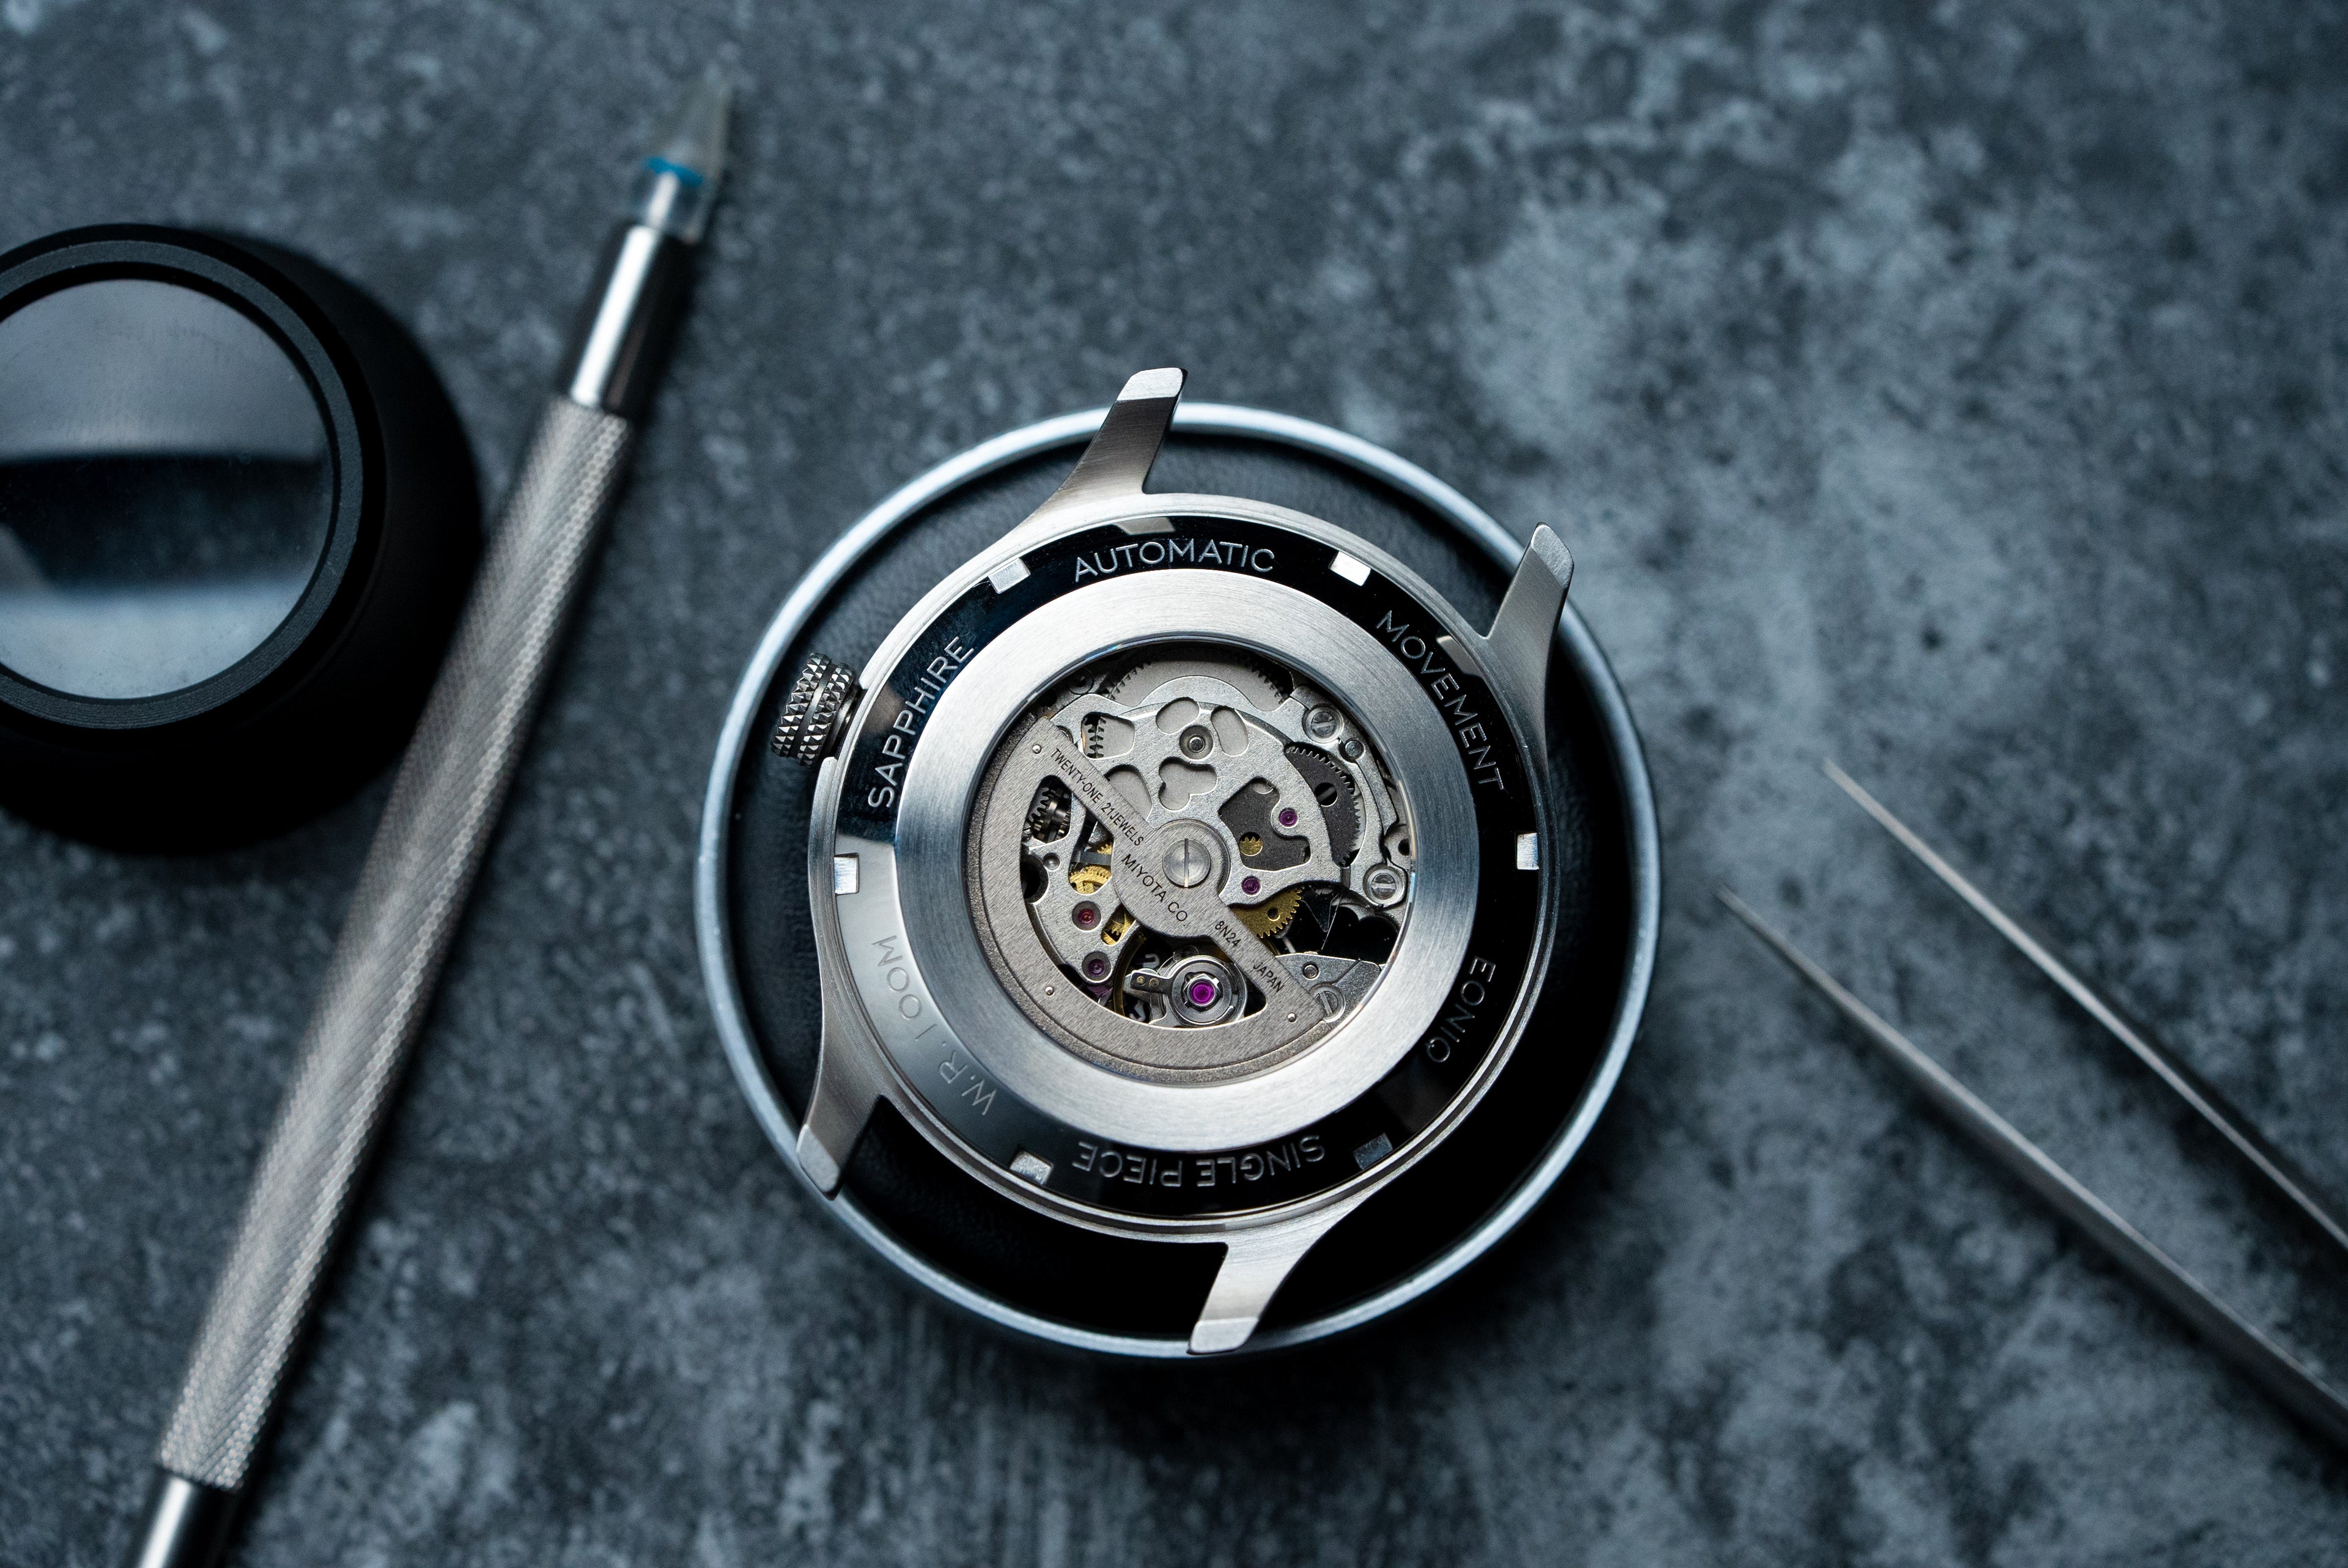 Sapphire exhibition case back of EONIQ custom watch with Miyota 8N24 movement. Other movements available.